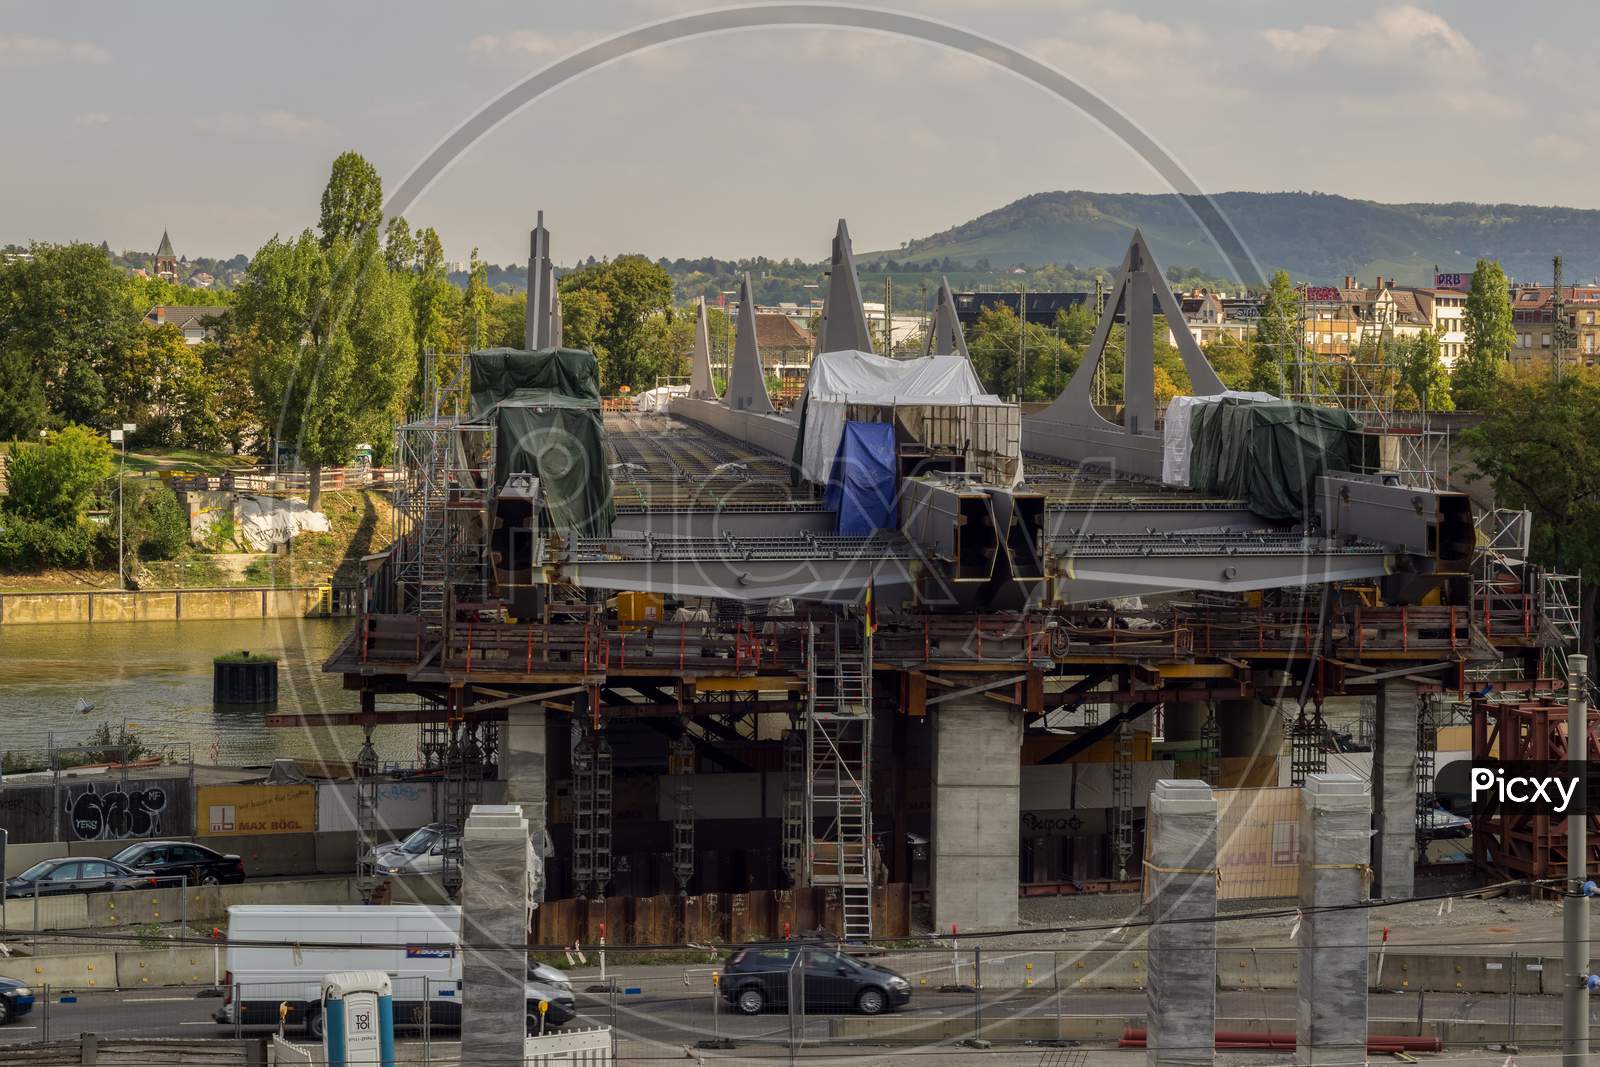 Stuttgart,Germany - September,15,2018: Bad Cannstatt Within The Infamous Project Stuttgart21 The City Is Building A New Bridge Across The Neckar,A Big River In South Germany.